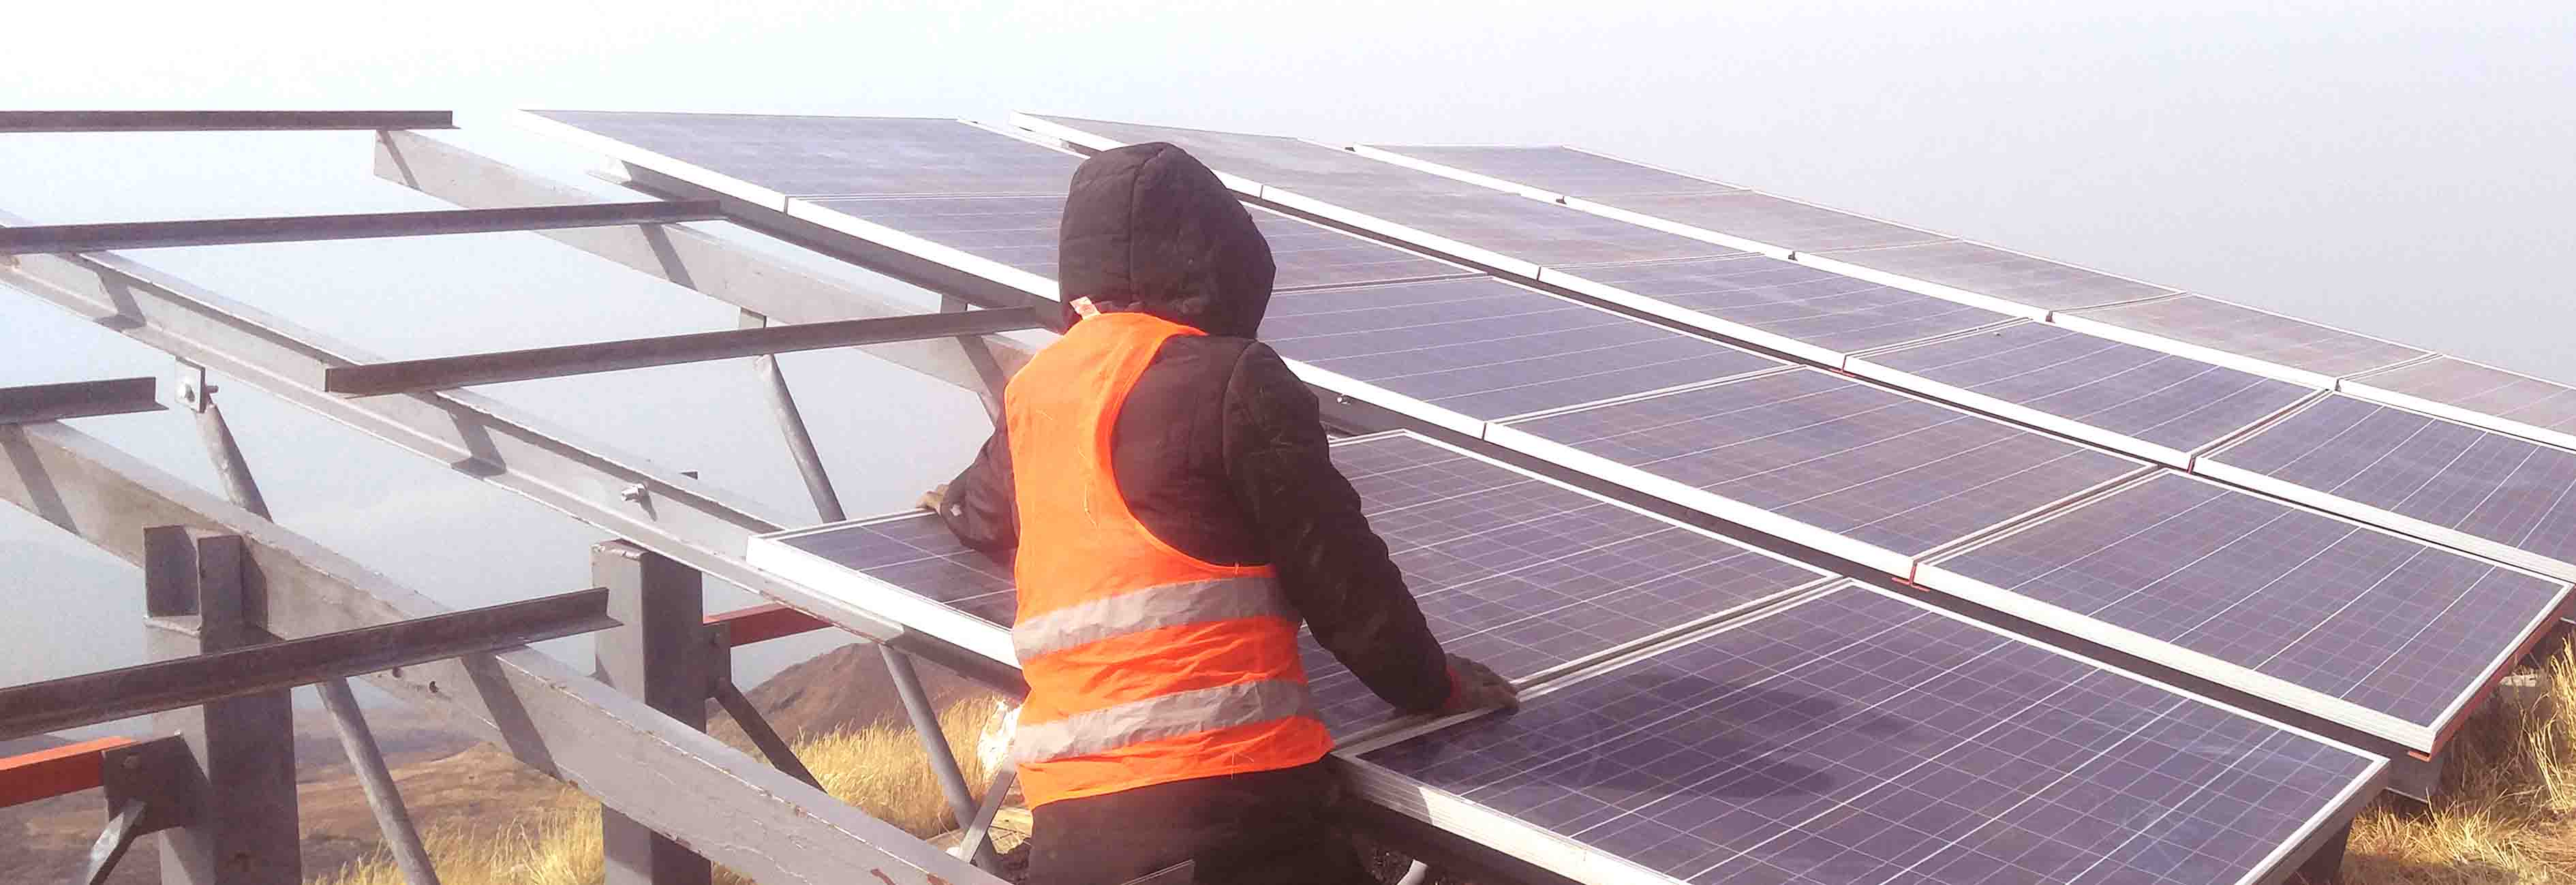 Afose Works Completes 9kw Solar Plant for Perenco